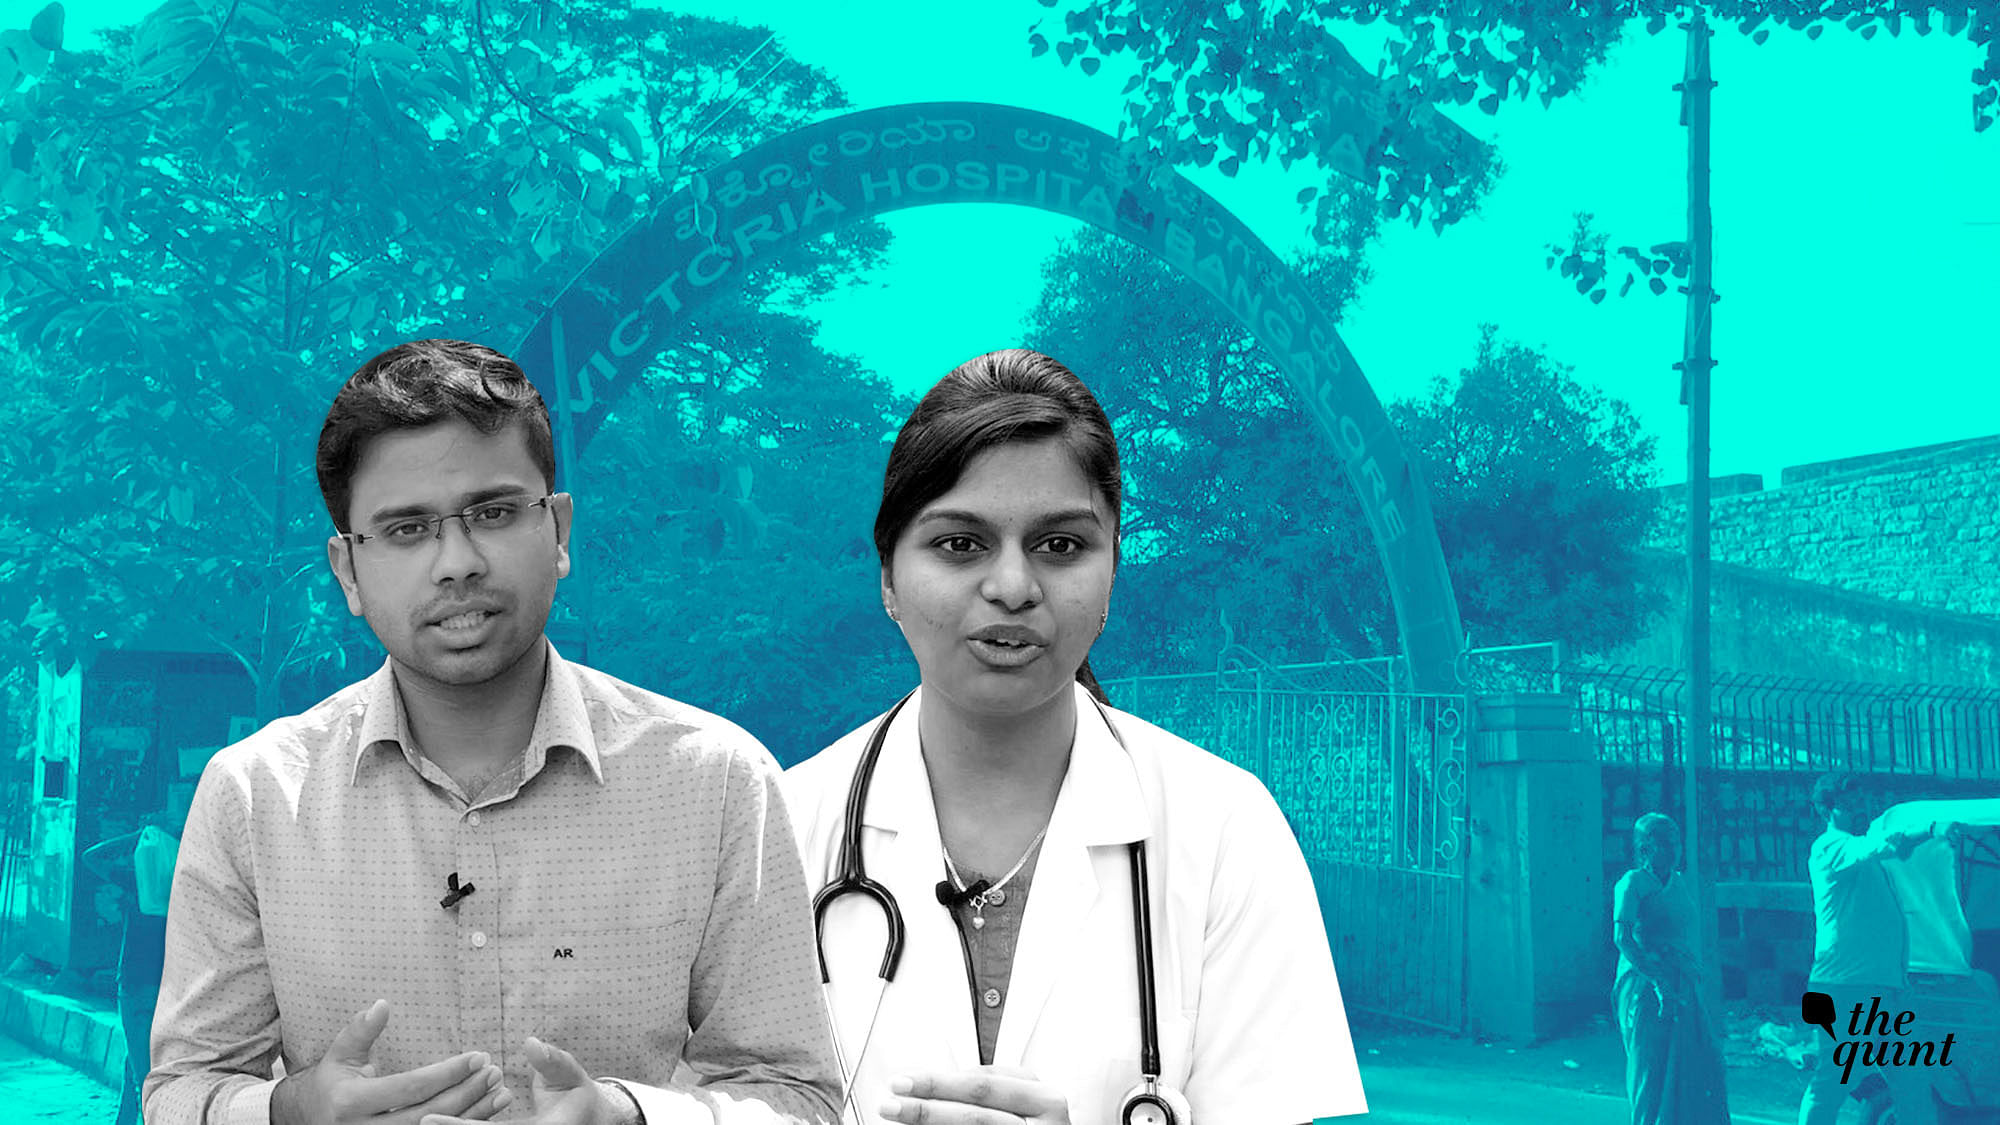 Govt doctors in Bengaluru are reeling under long working hours and a constant fear of backlash from patients.